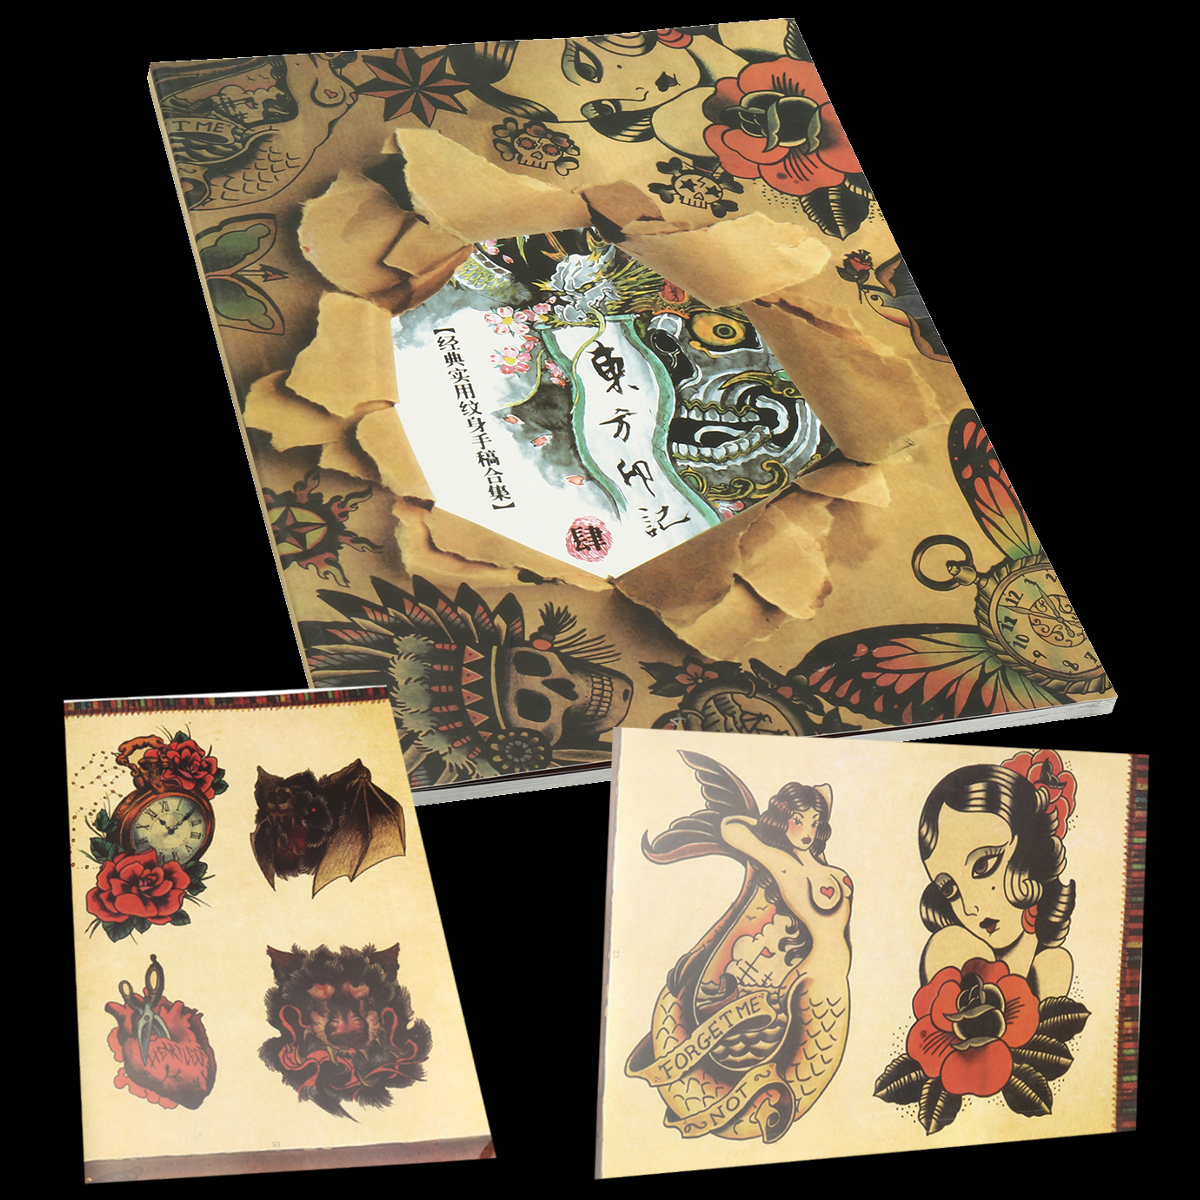 Traditional-Chinese-Traditional-Elements-Of-108-Pages-Of-Tattoo-Design-Flash-Book-1664910-1